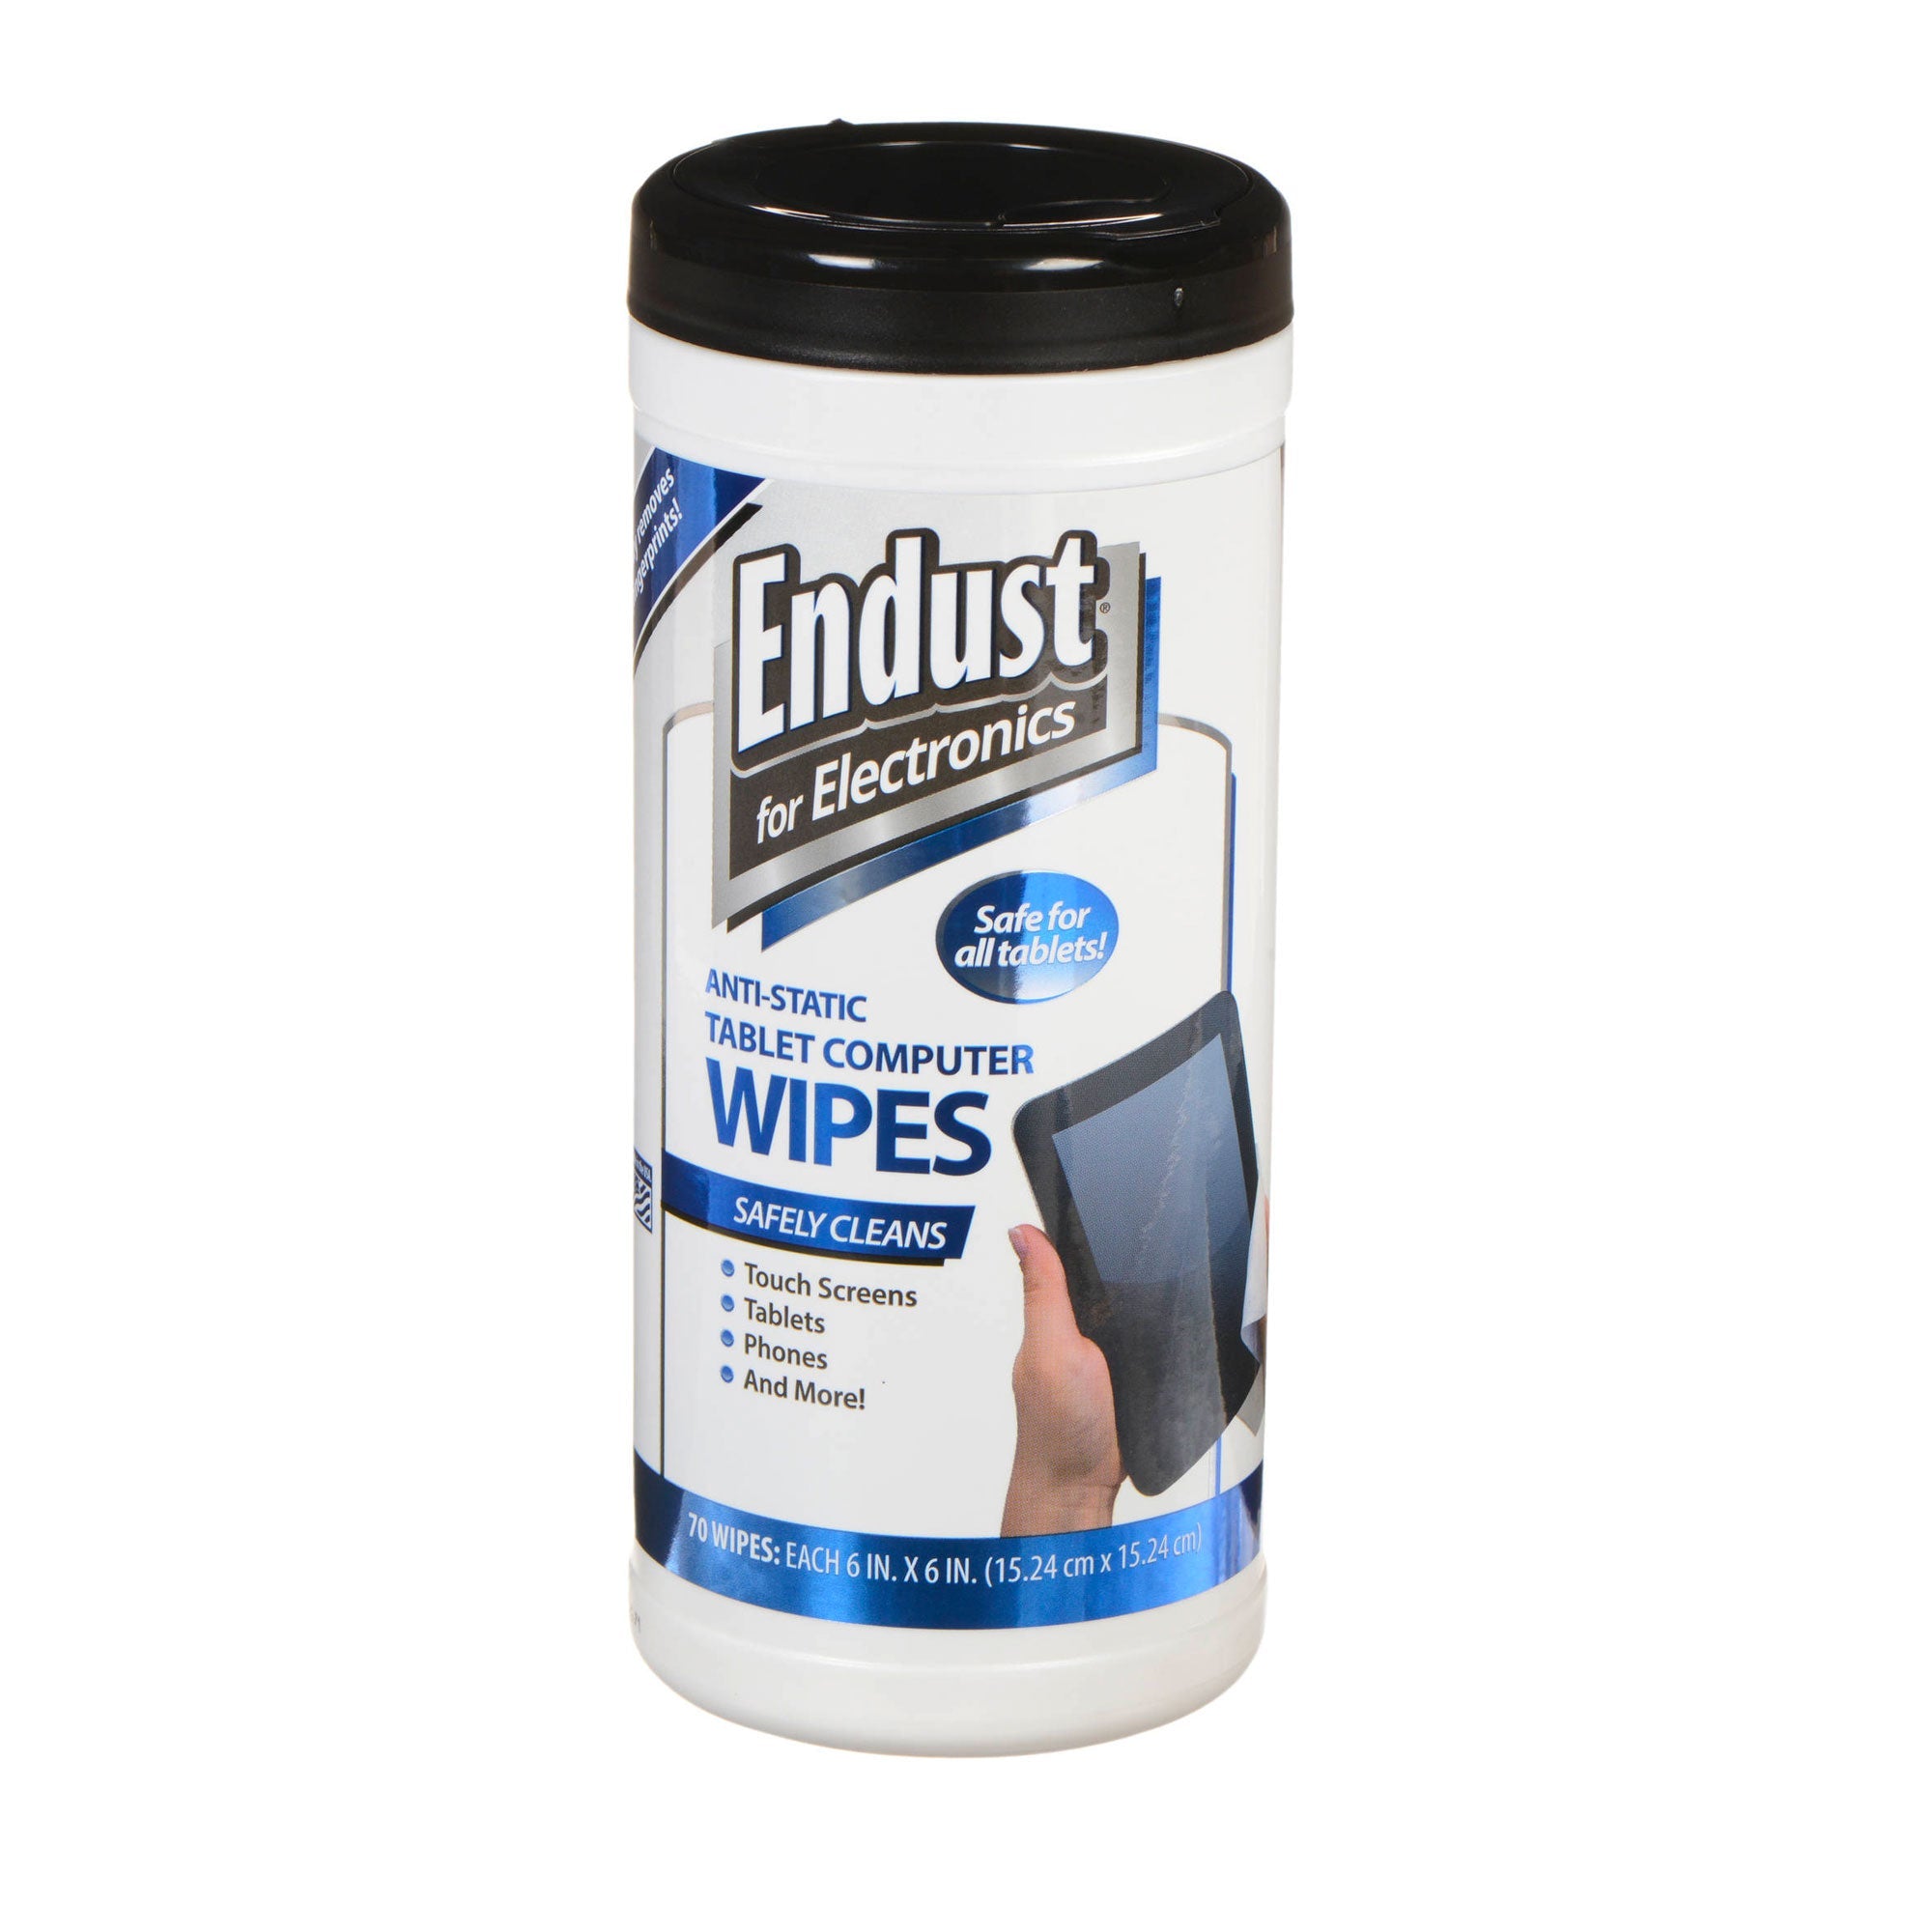 Endust Anti-Static Tablet Computer Wipes (70 Count)